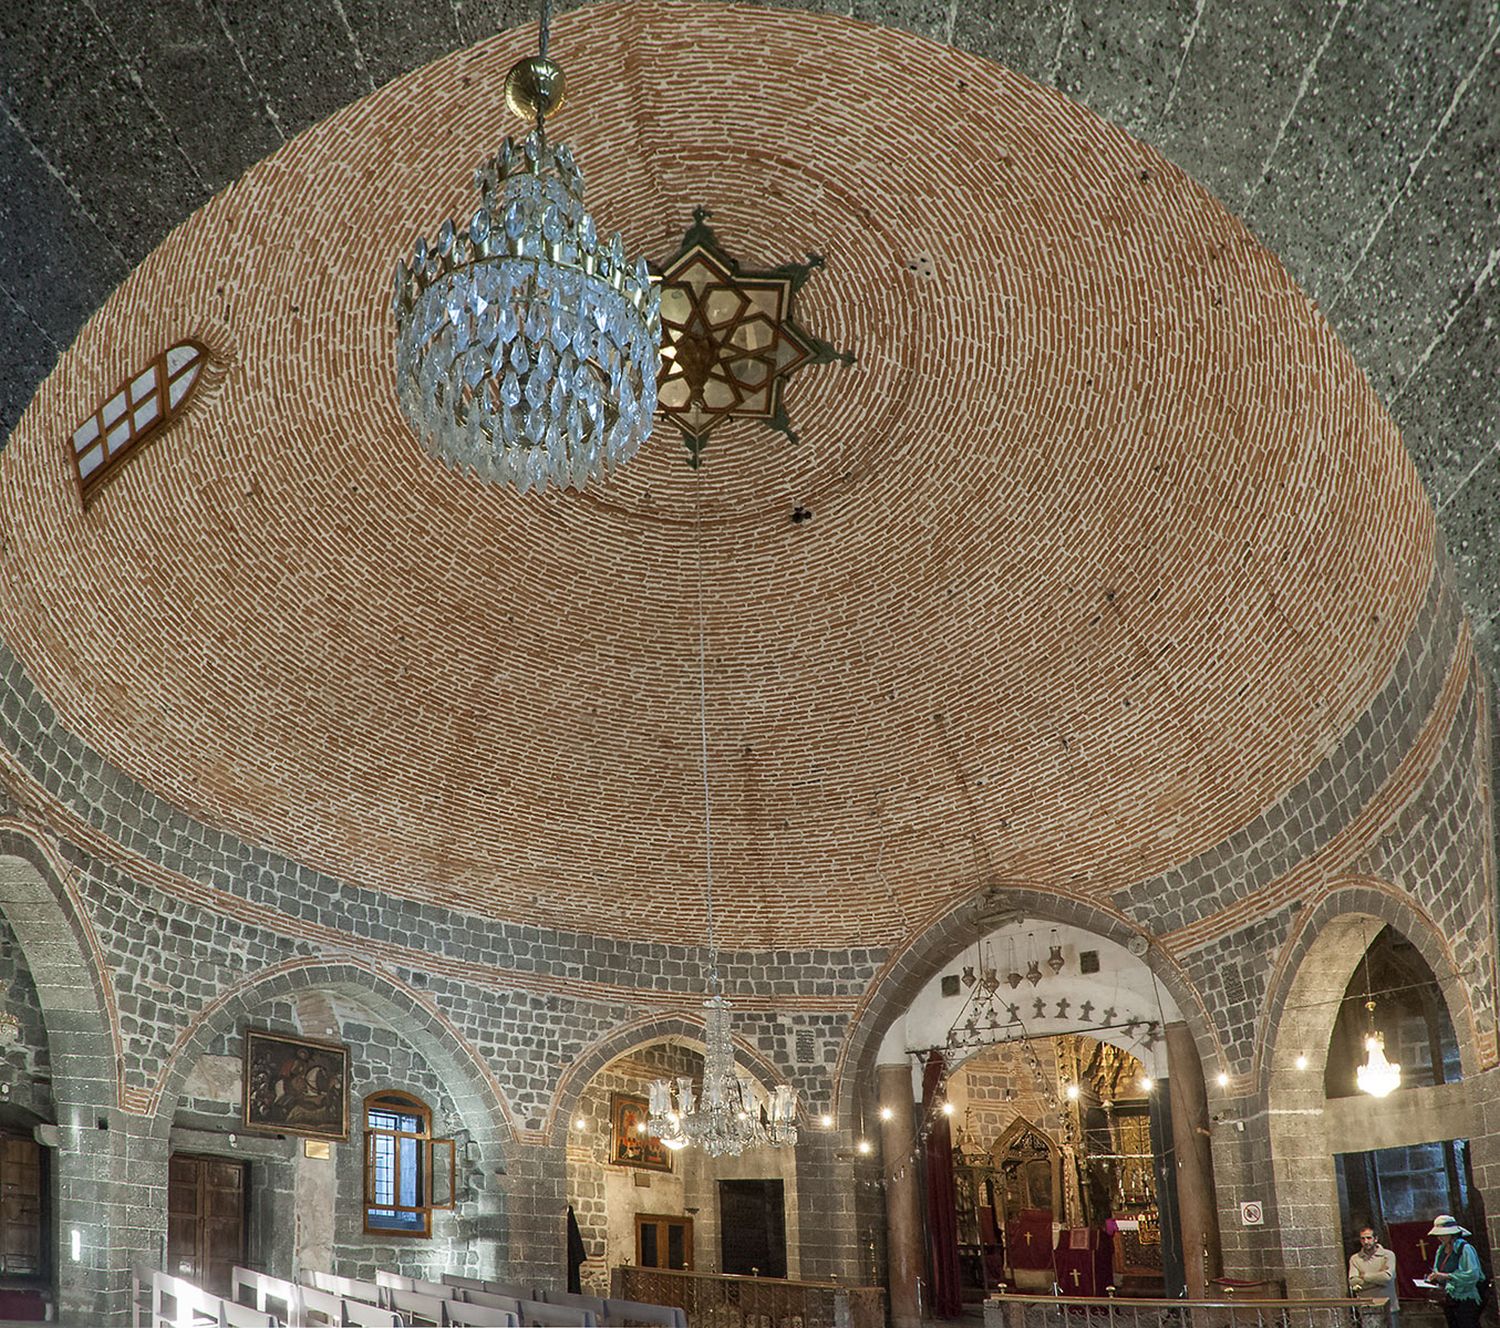 Interior view of dome, facing northeast.